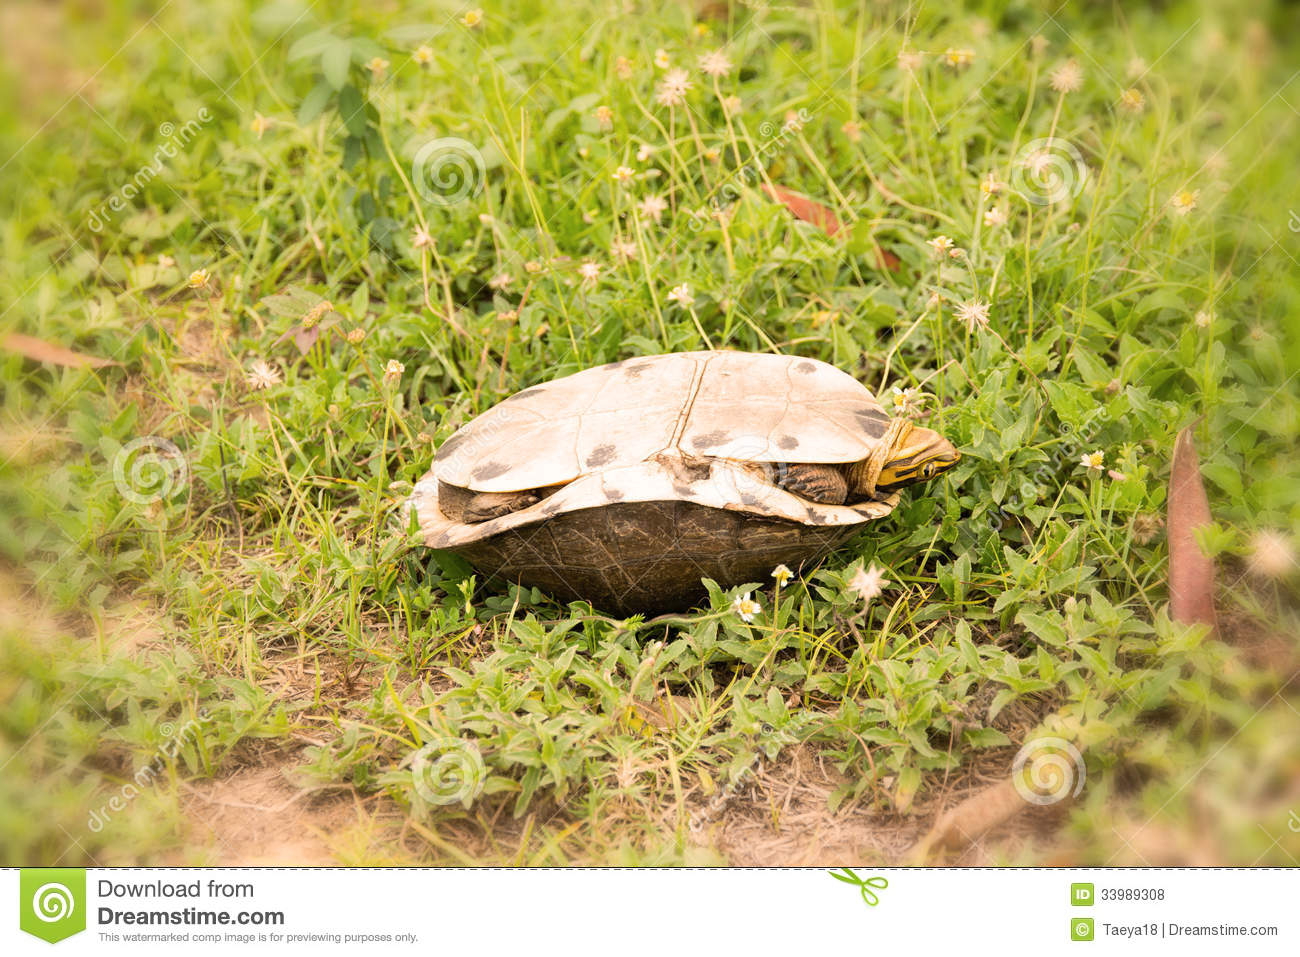 Turtle Upside Down Royalty Free Stock Photos   Image  33989308